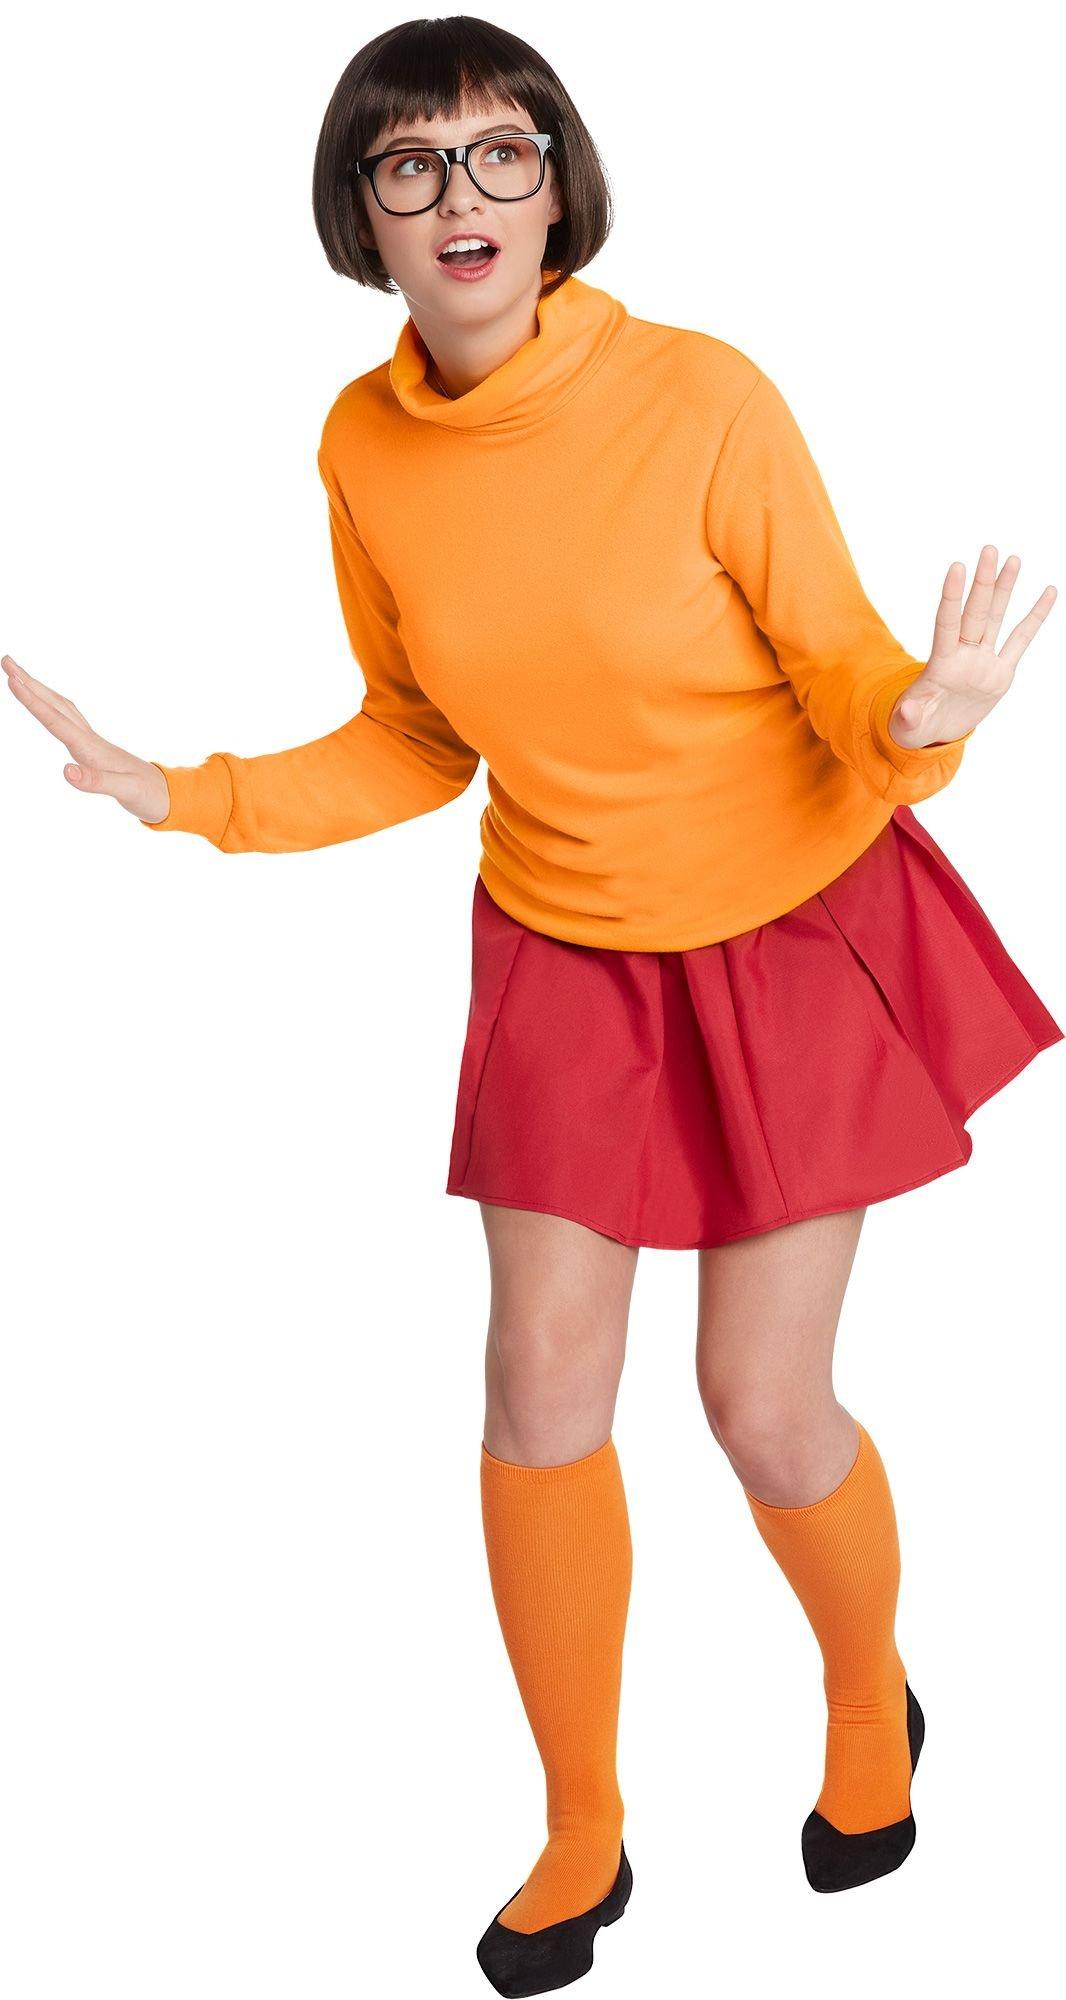 Scooby Doo Costumes - Velma, Shaggy Costumes & More | Party City